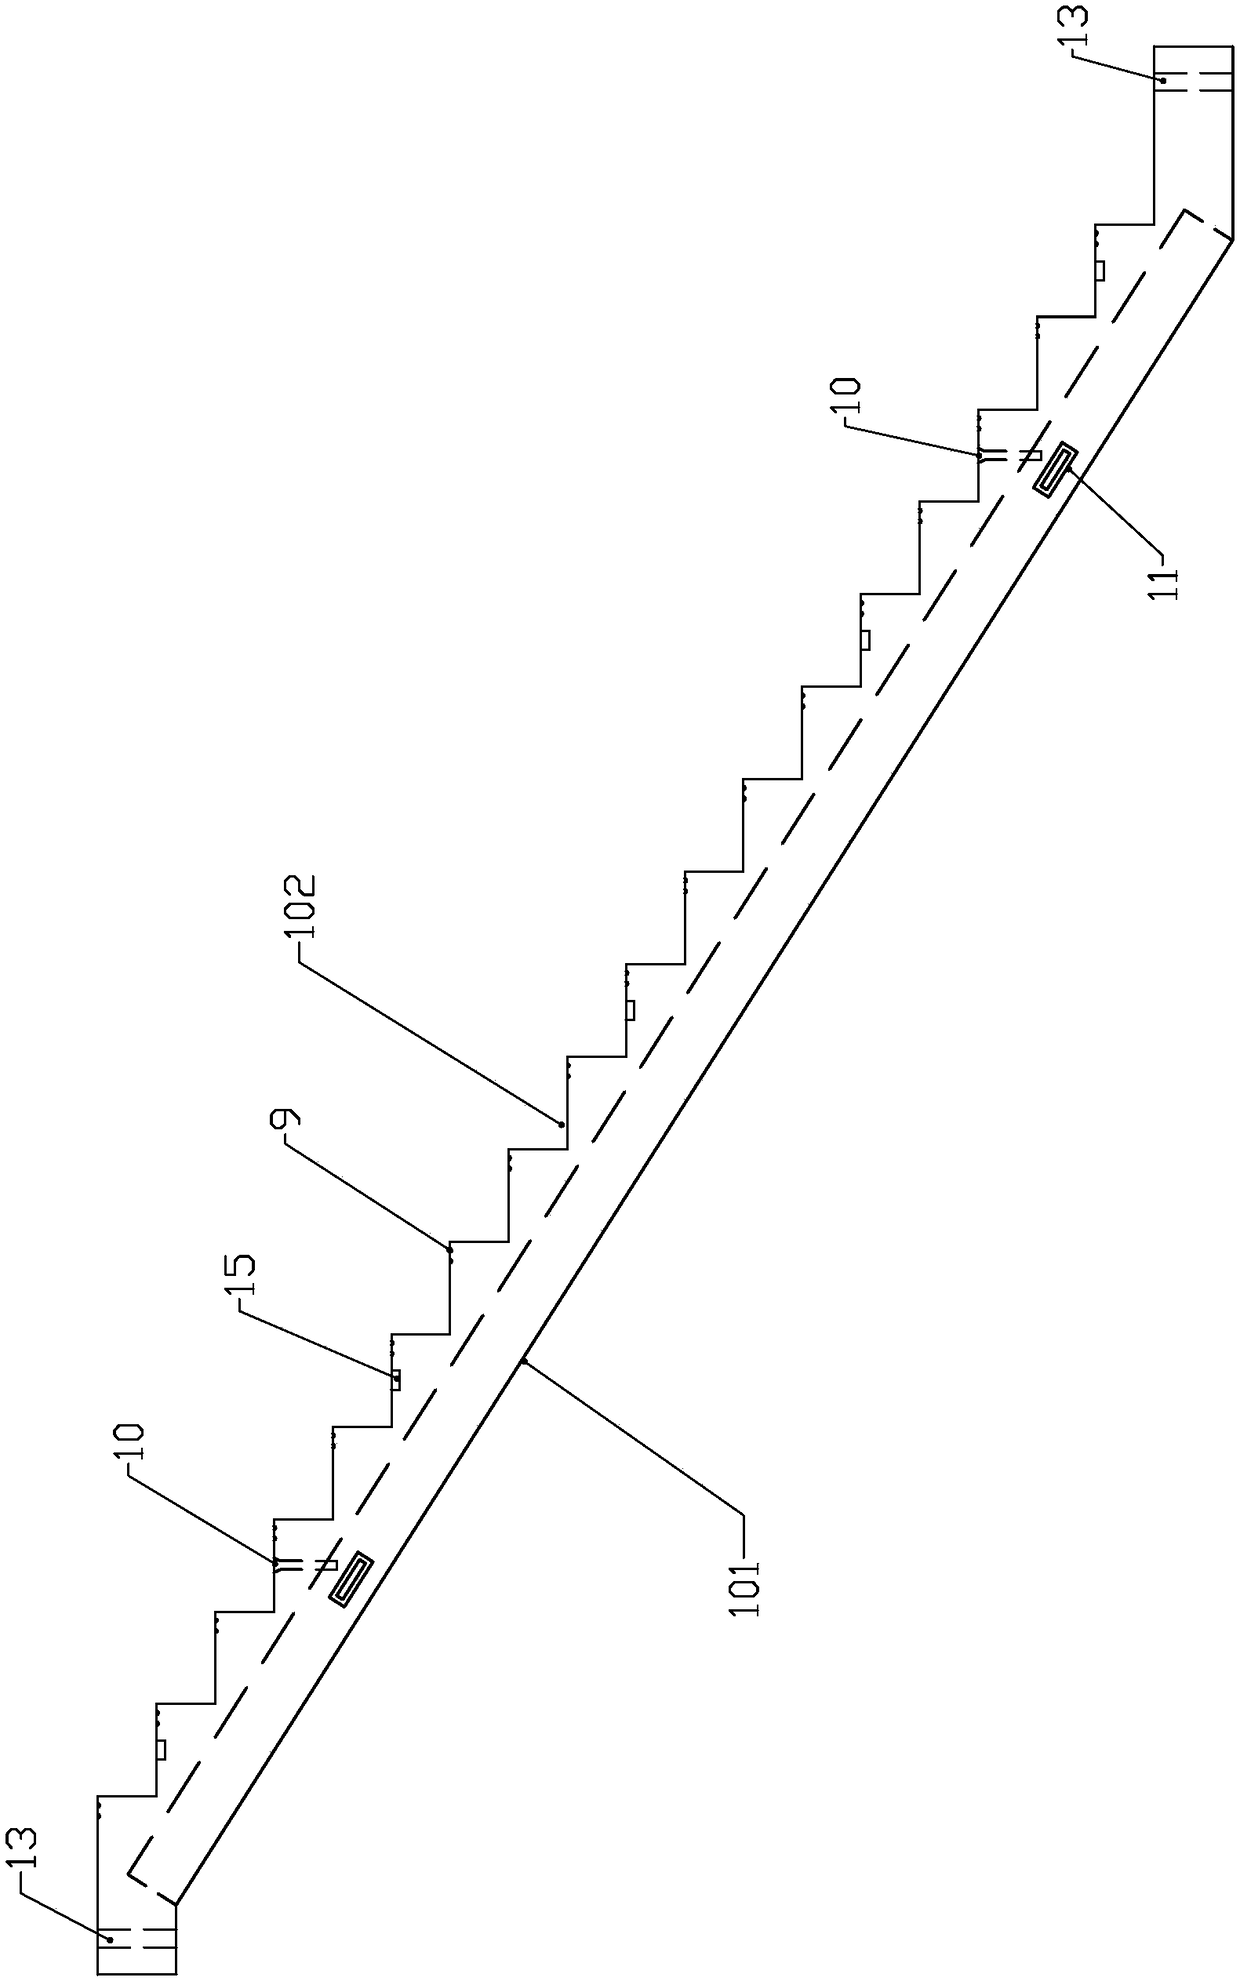 Precast prestresed-concrete beam-type stair and making construction method